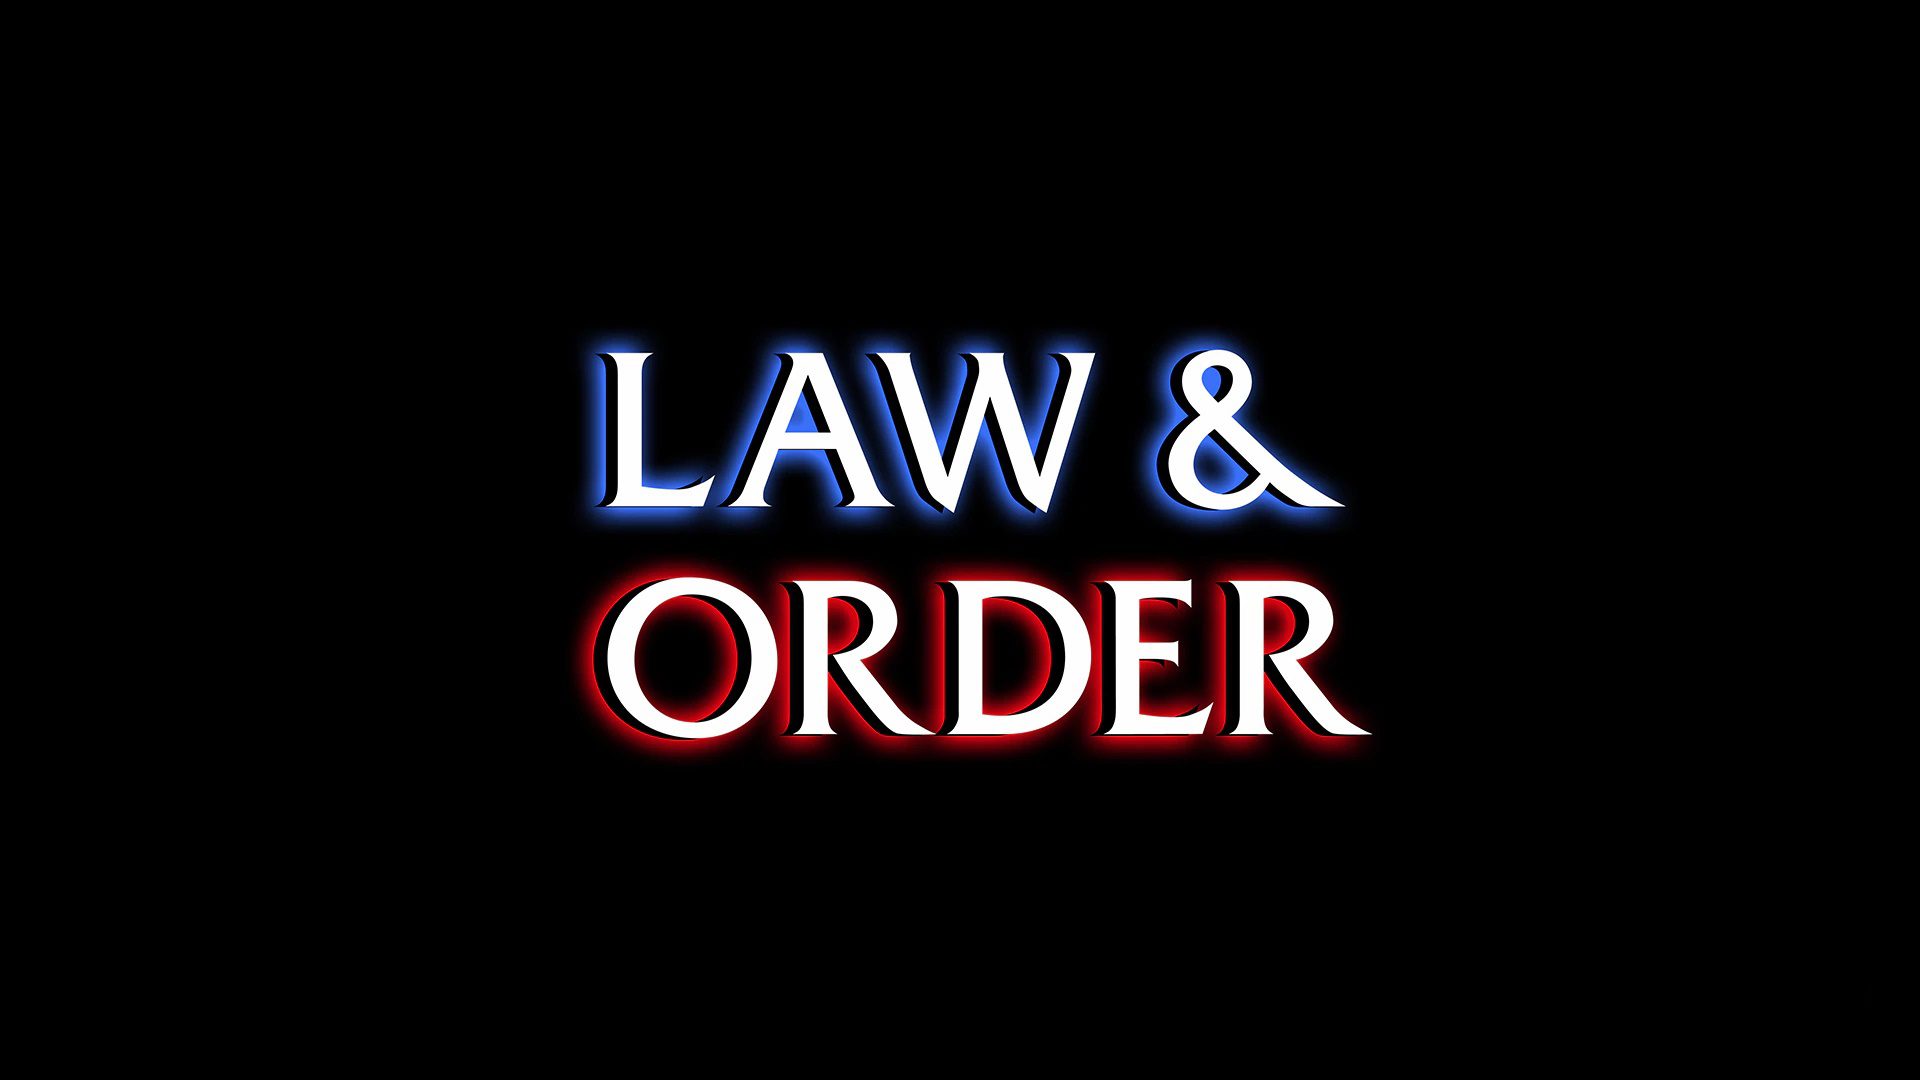 Law & Order Poster HD